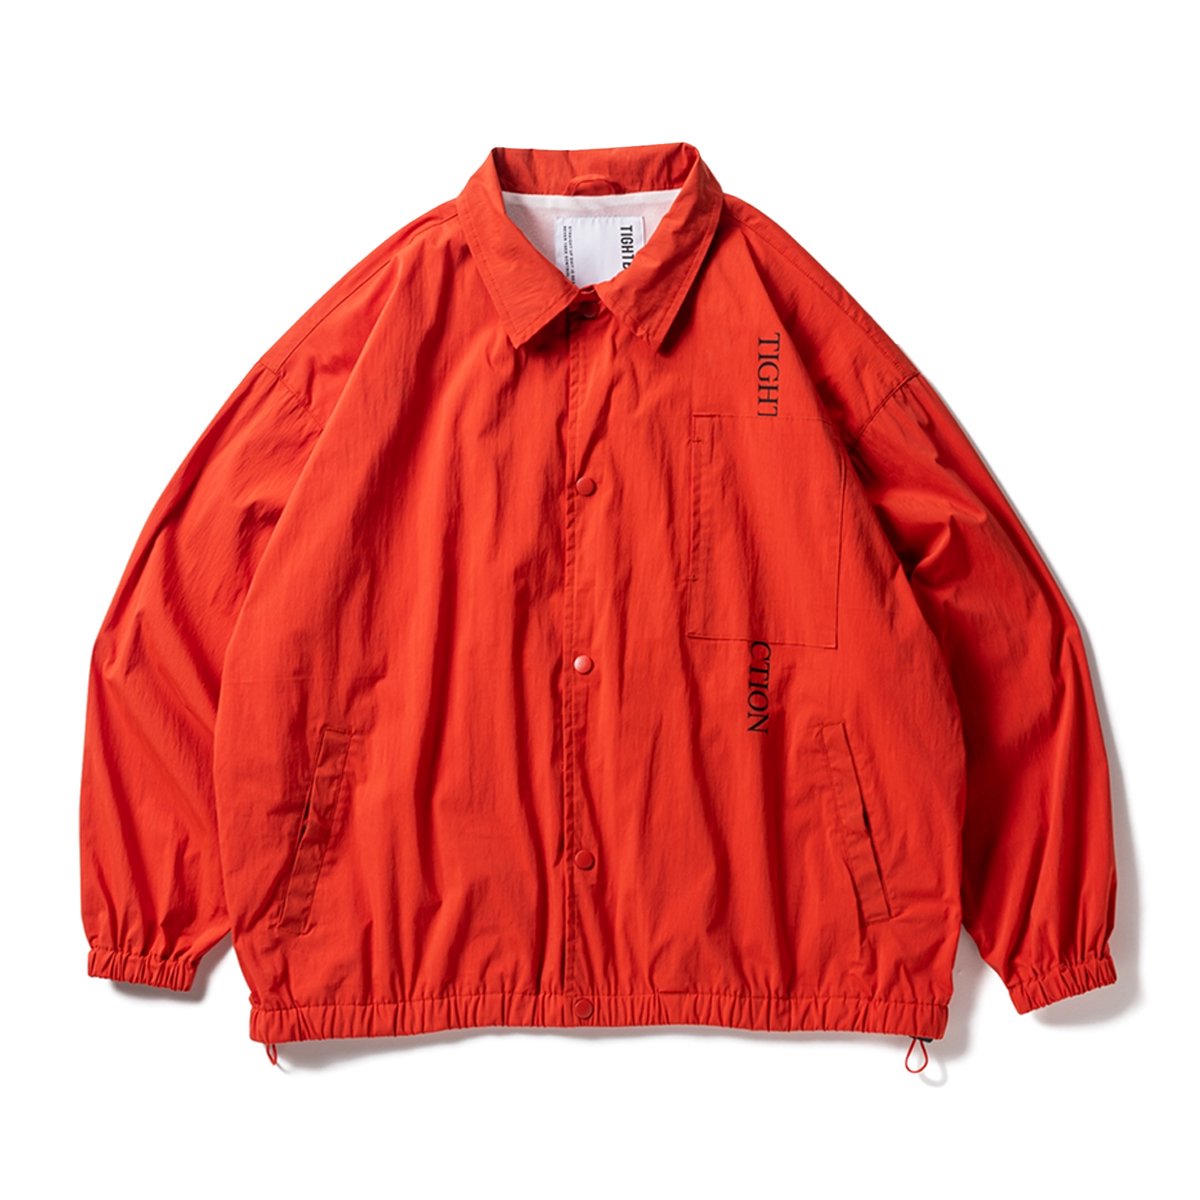 TIGHTBOOTHStraight Up Coach Jacket (Orange)
                          </a>
            <span class=